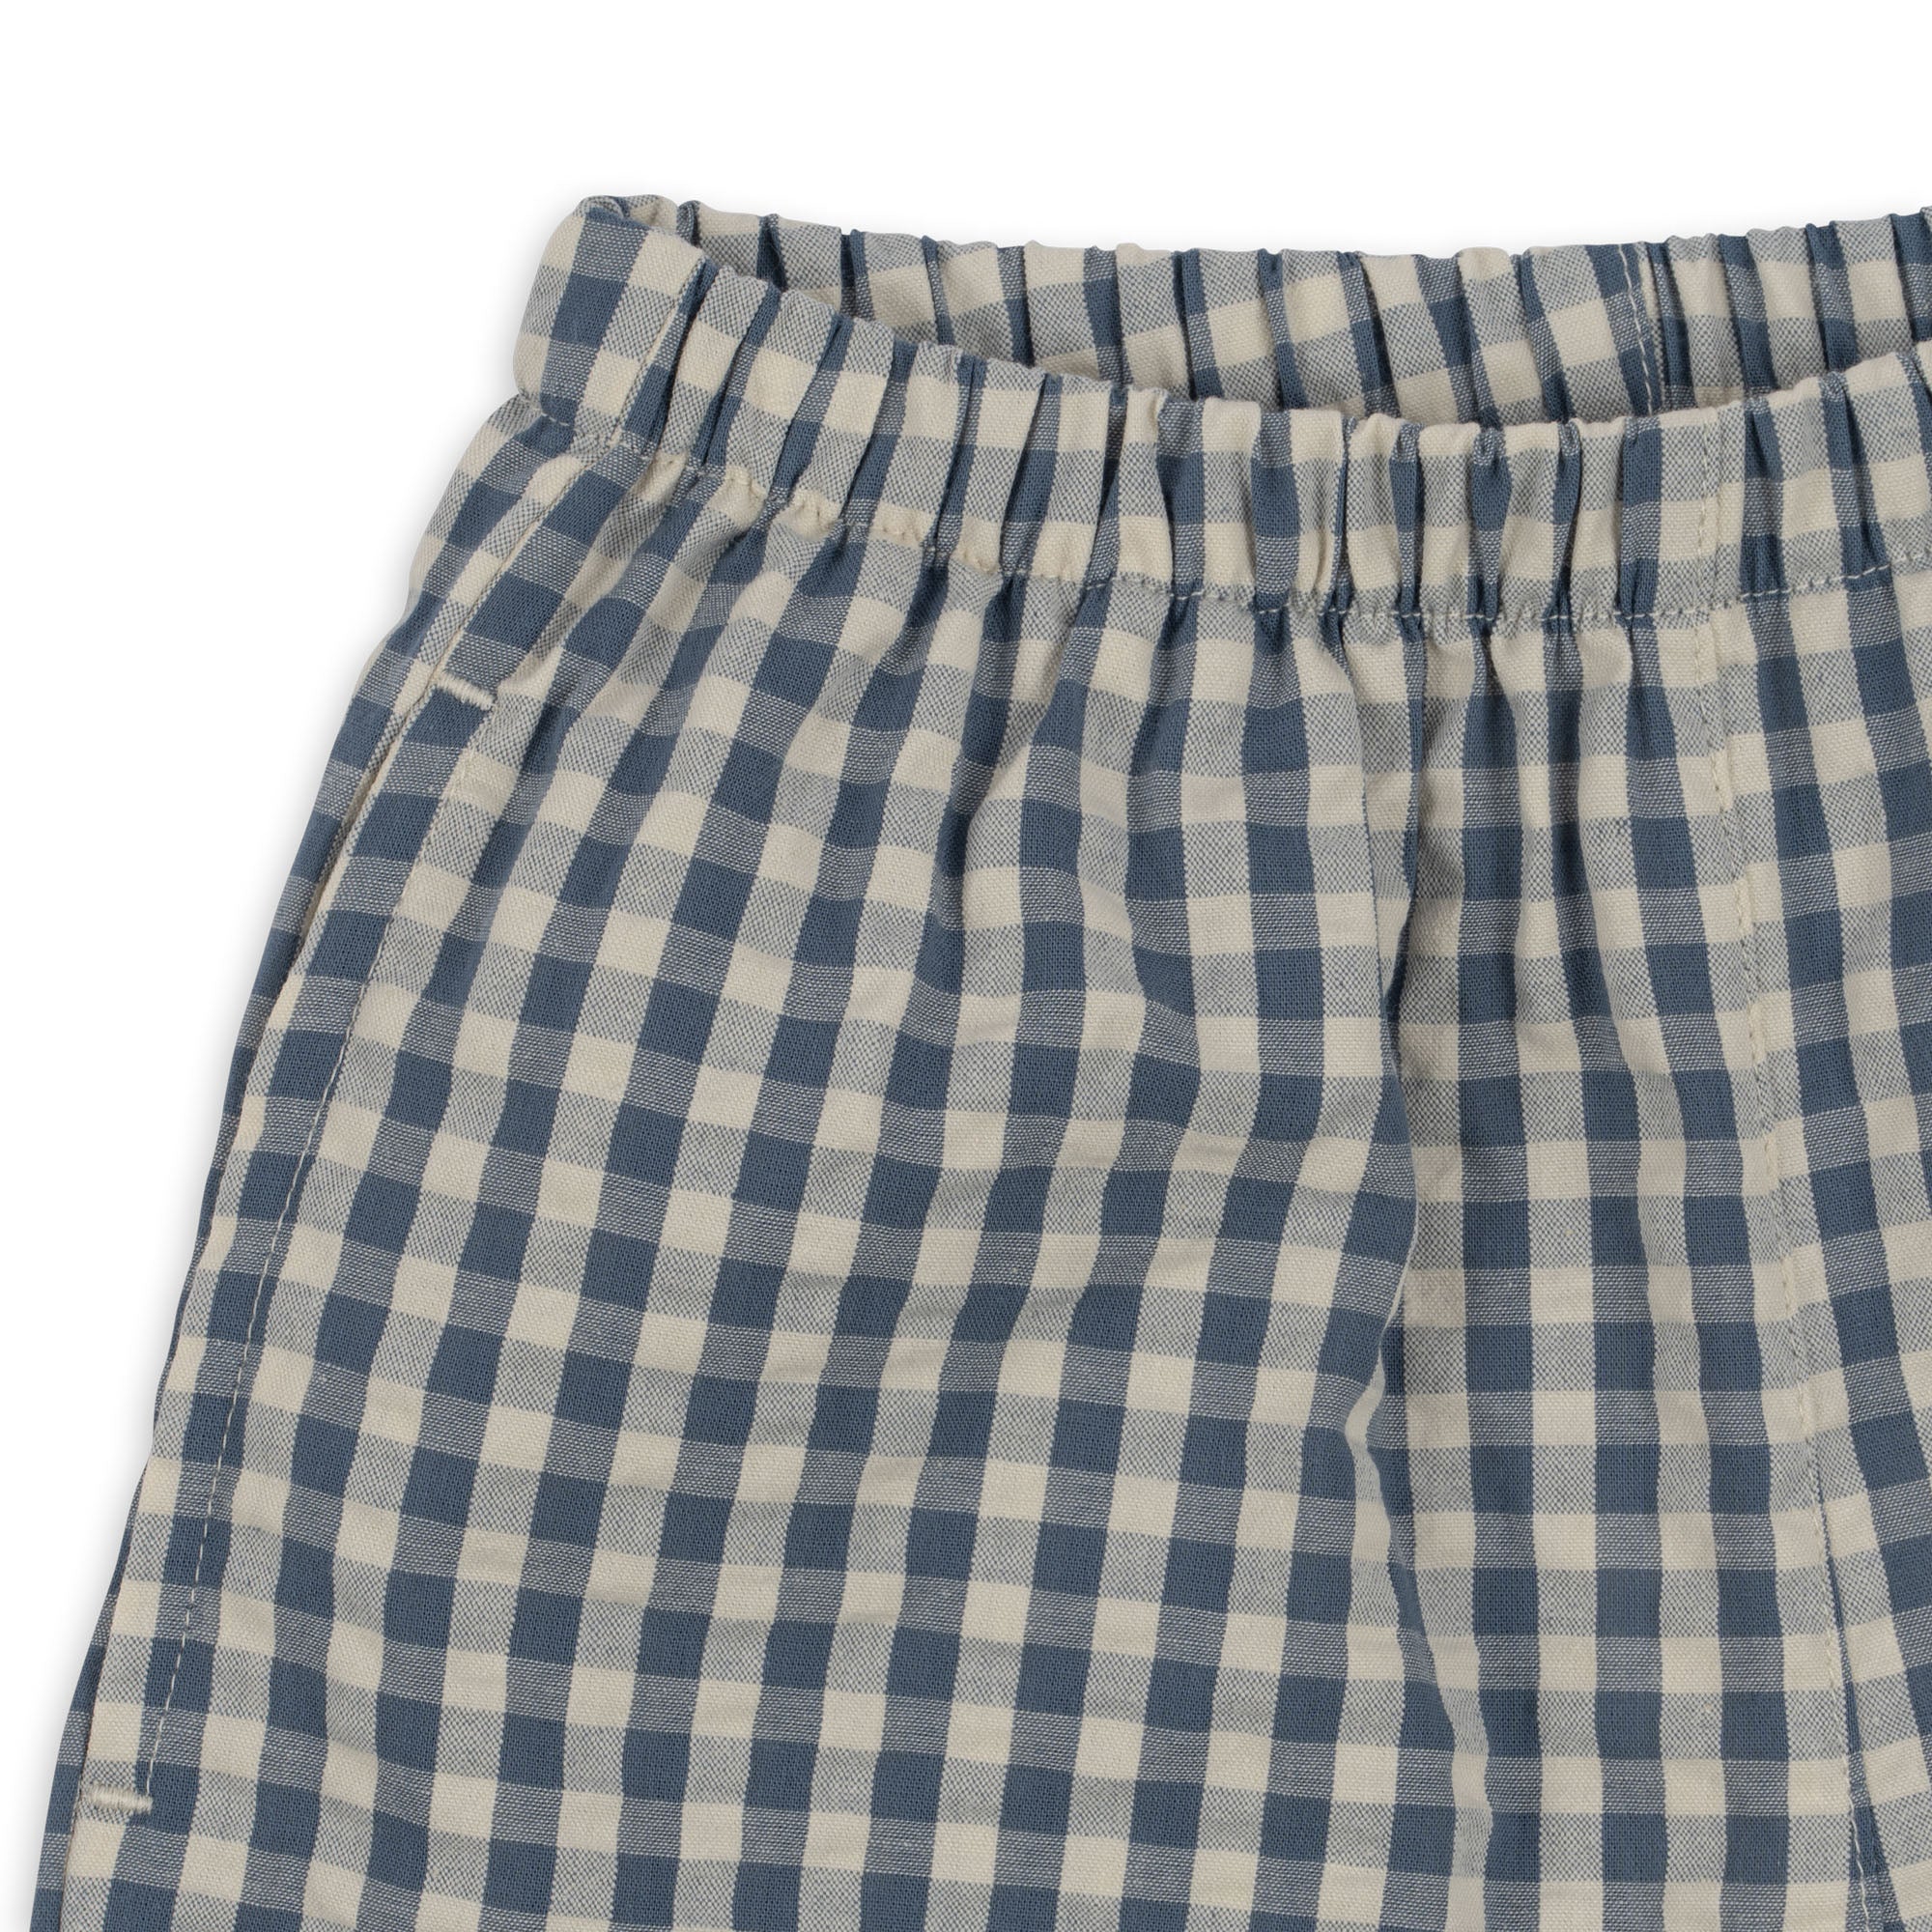 Konges Sløjd A/S KIM SHORTS Shorts and bloomers - Woven CAPTAINS BLUE CHECK